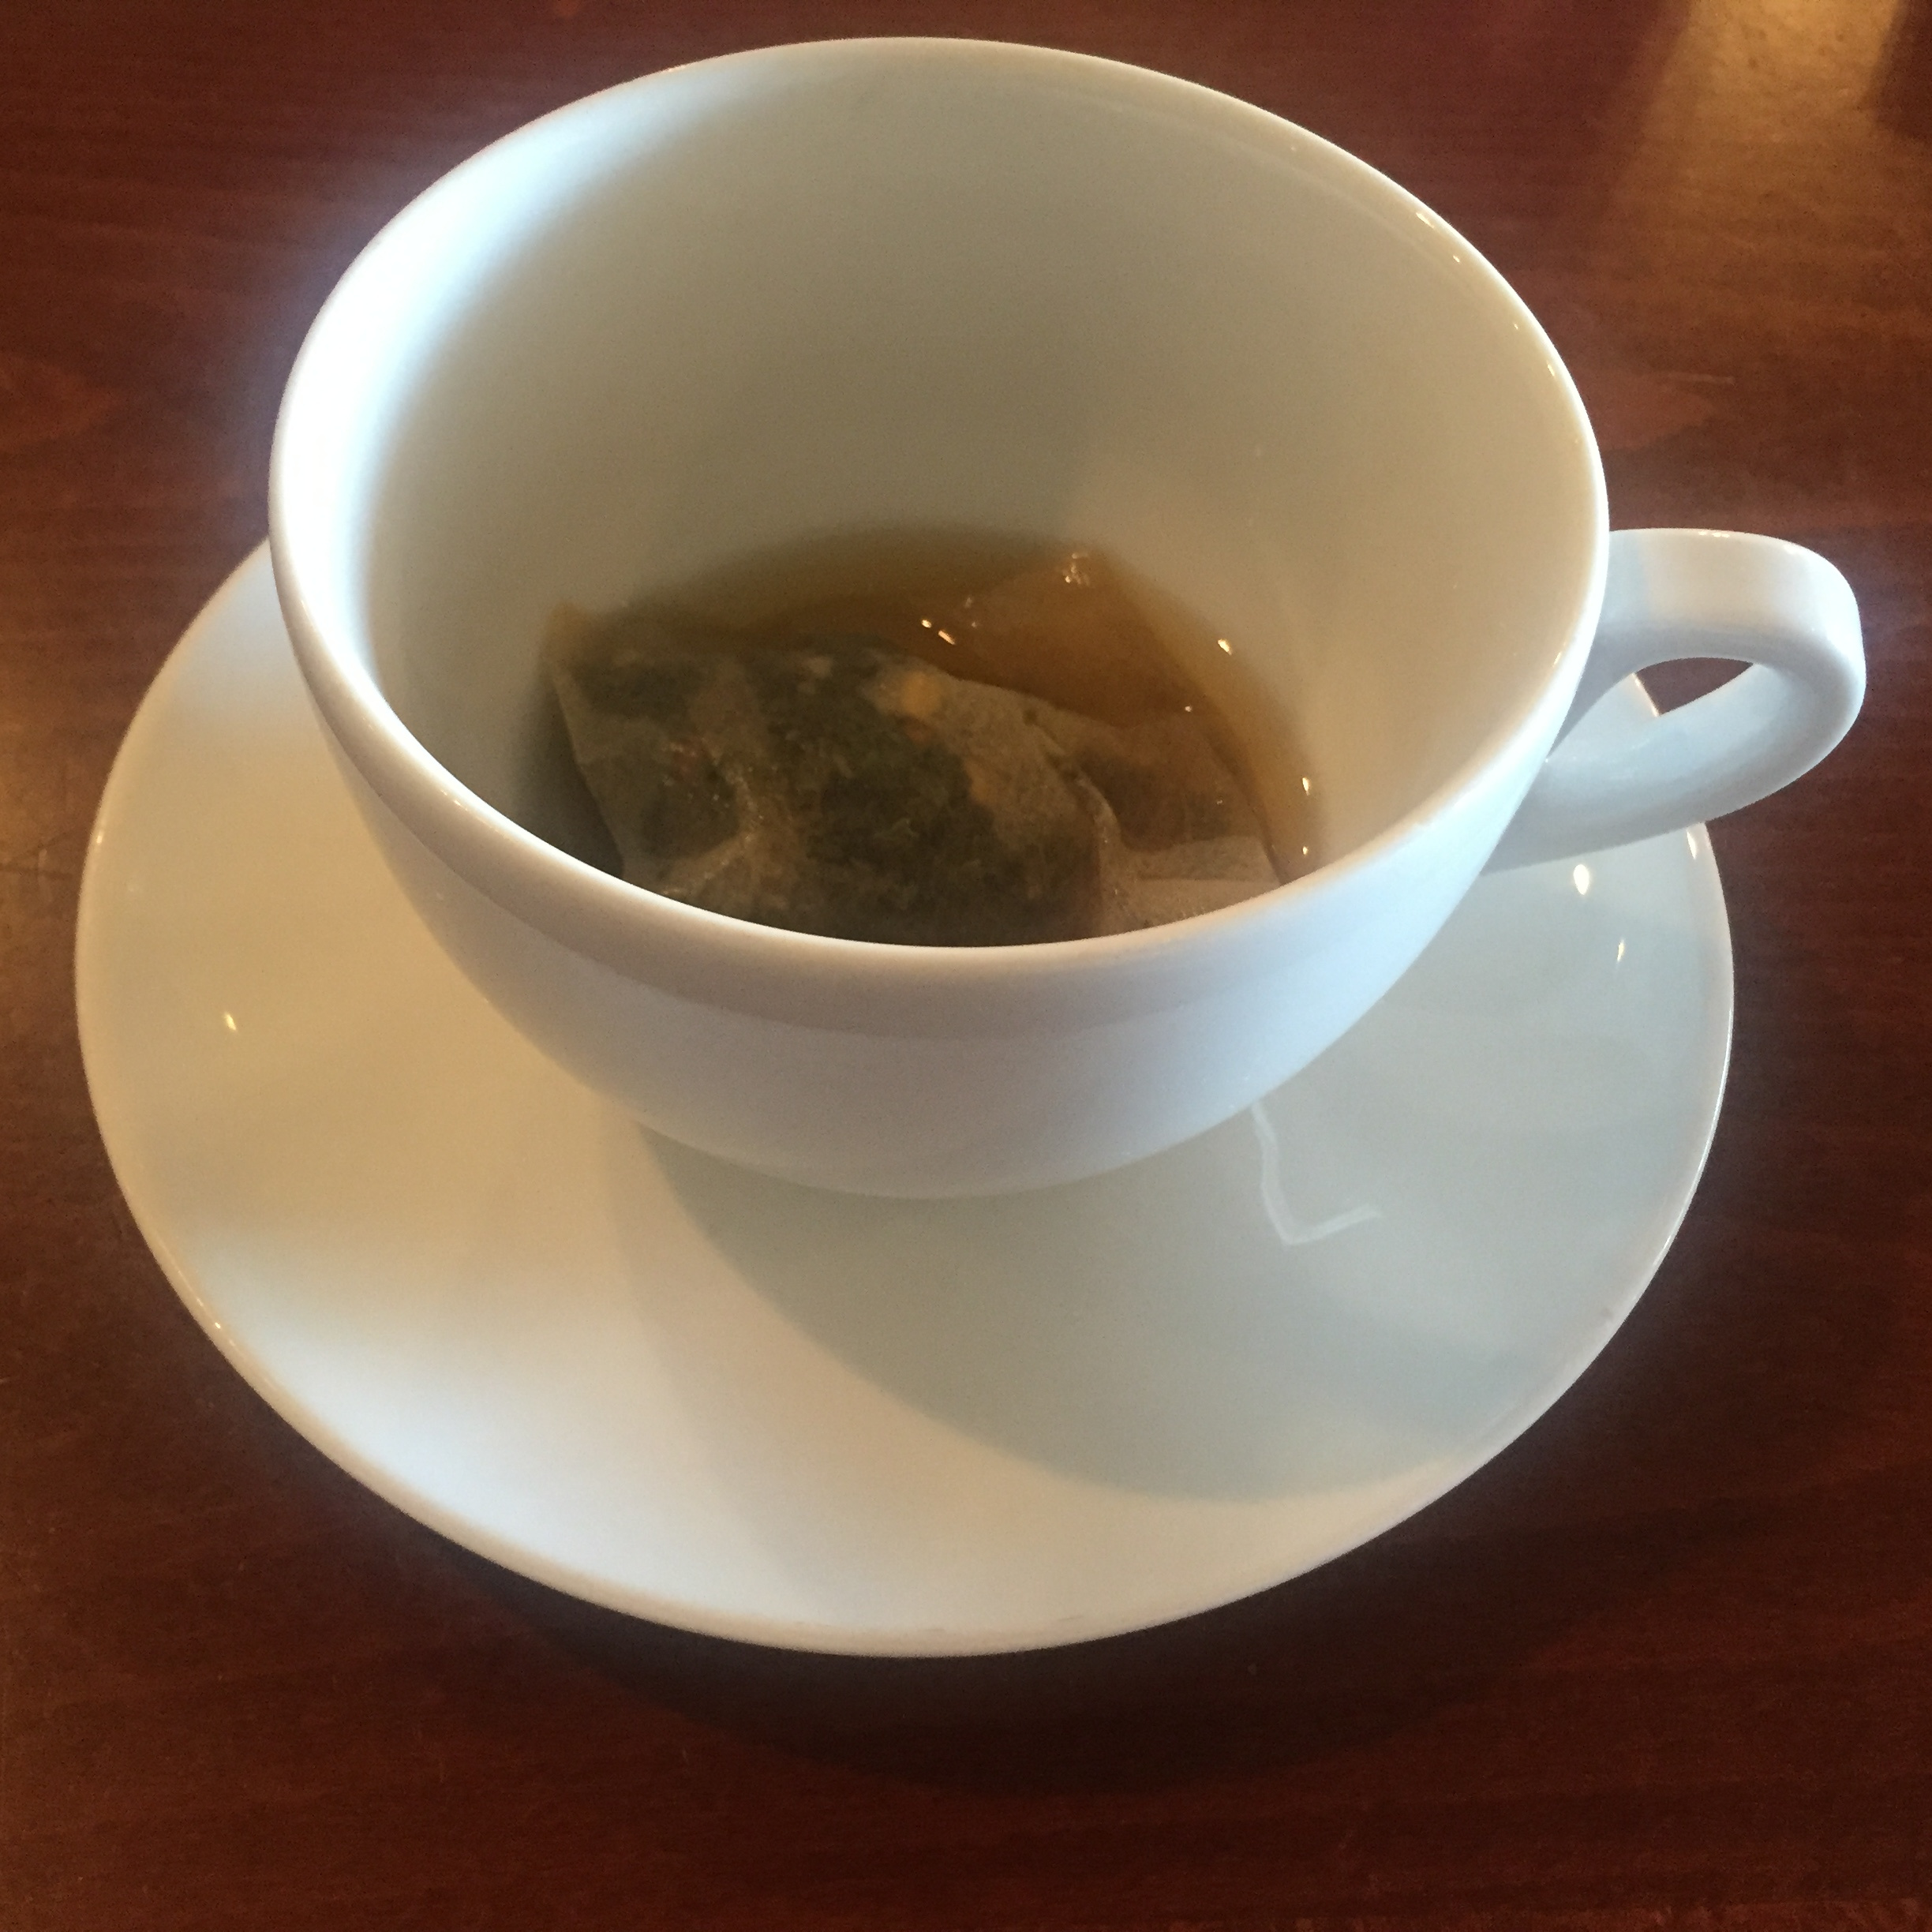 White tea cup with a tea bag and just a little tea left